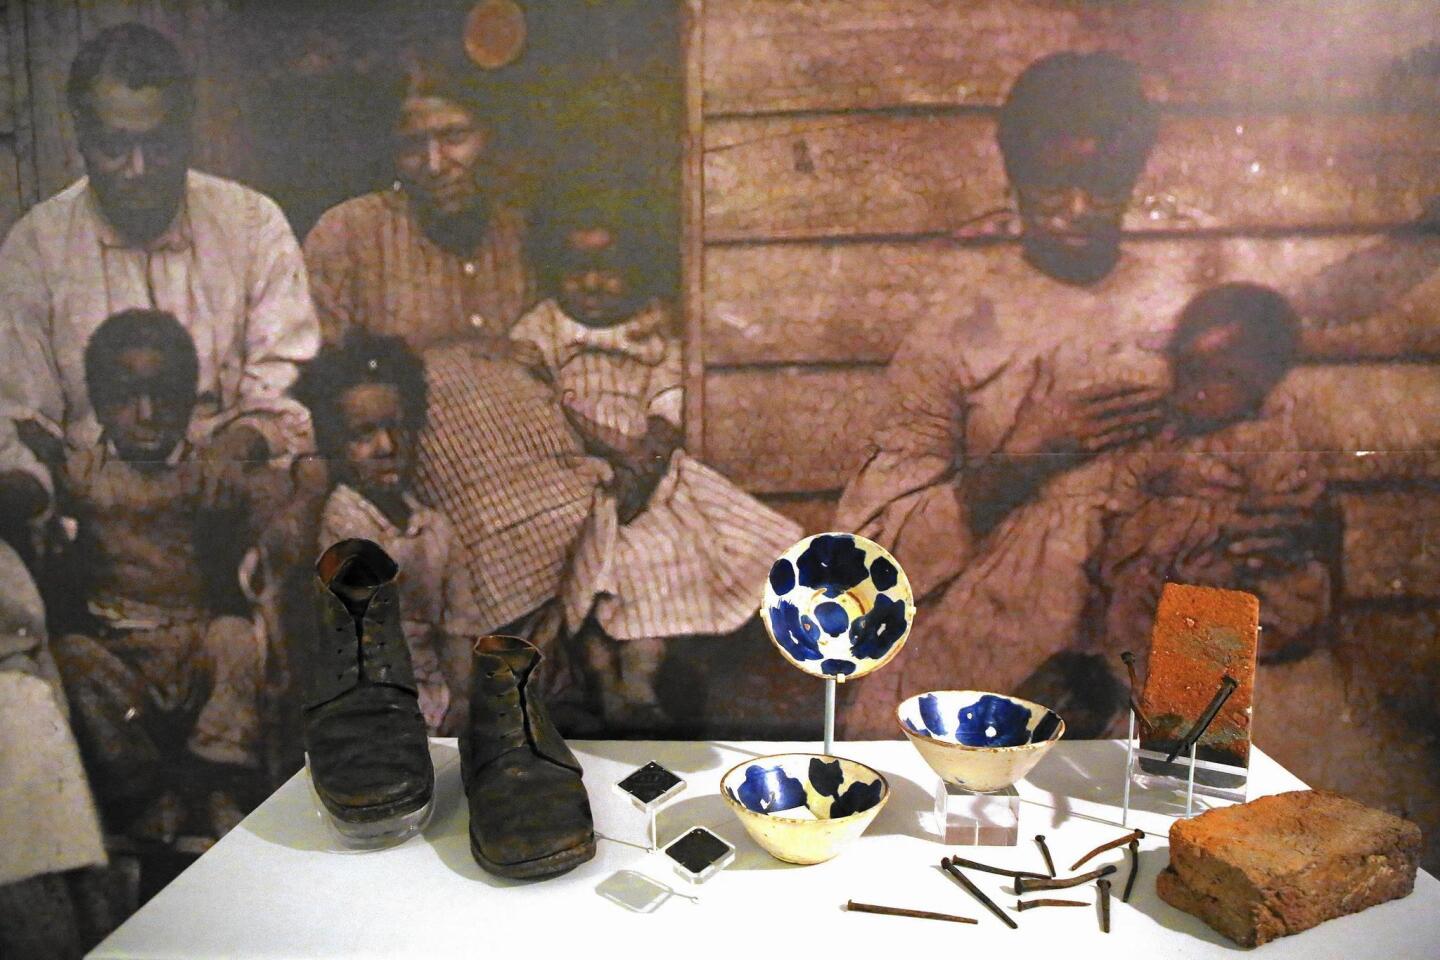 Slave-related artifacts are on display at the DuSable Museum of African American History as part of the permanent exhibit “Freedom, Resistance and the Journey Toward Equality.”